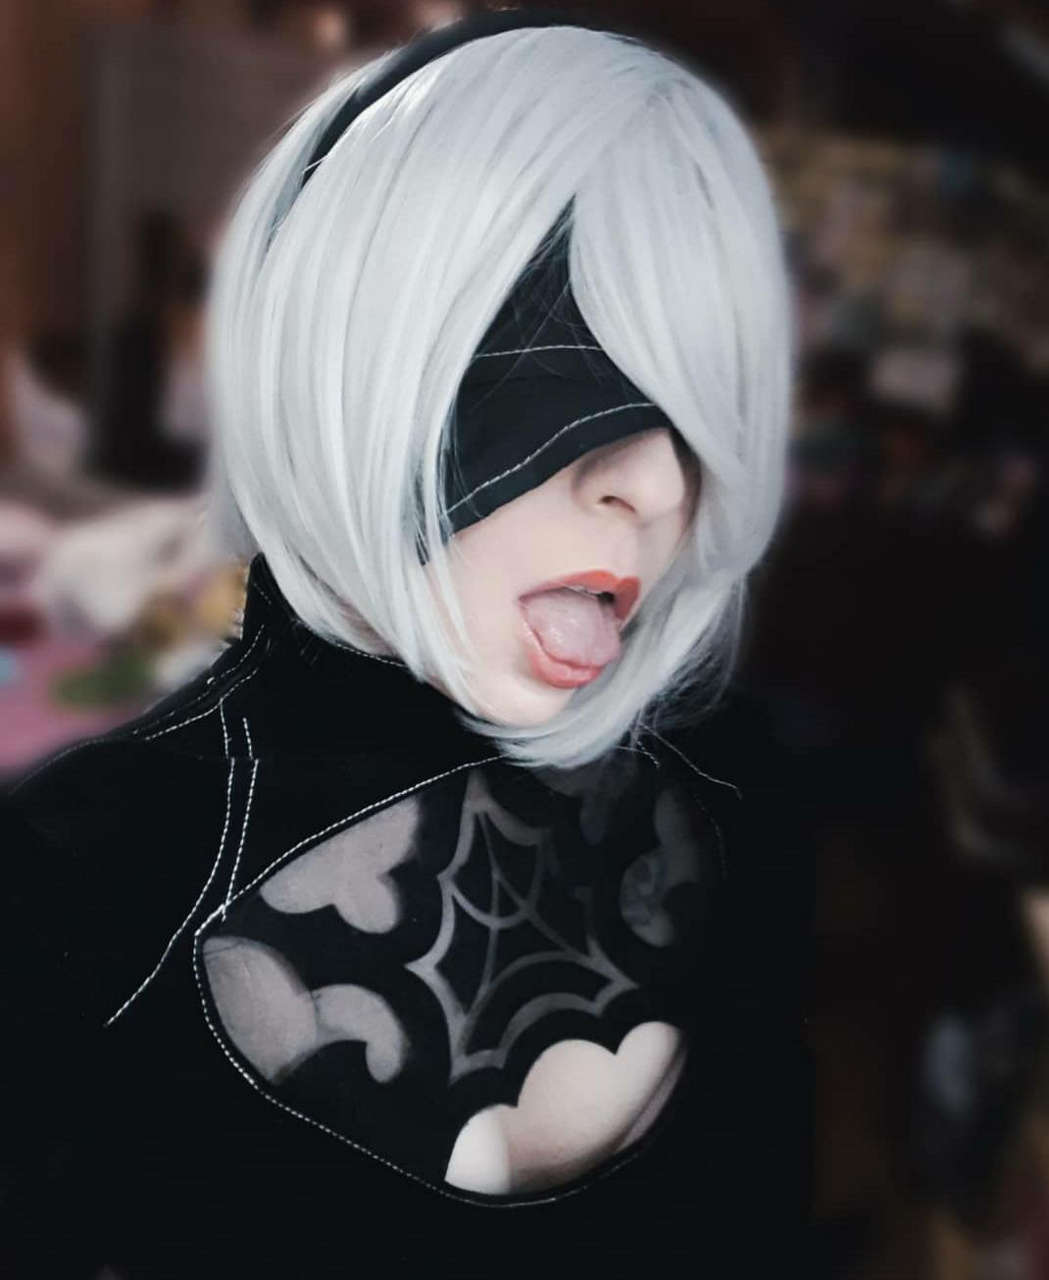 My Cosplay 2b From Nier Automata